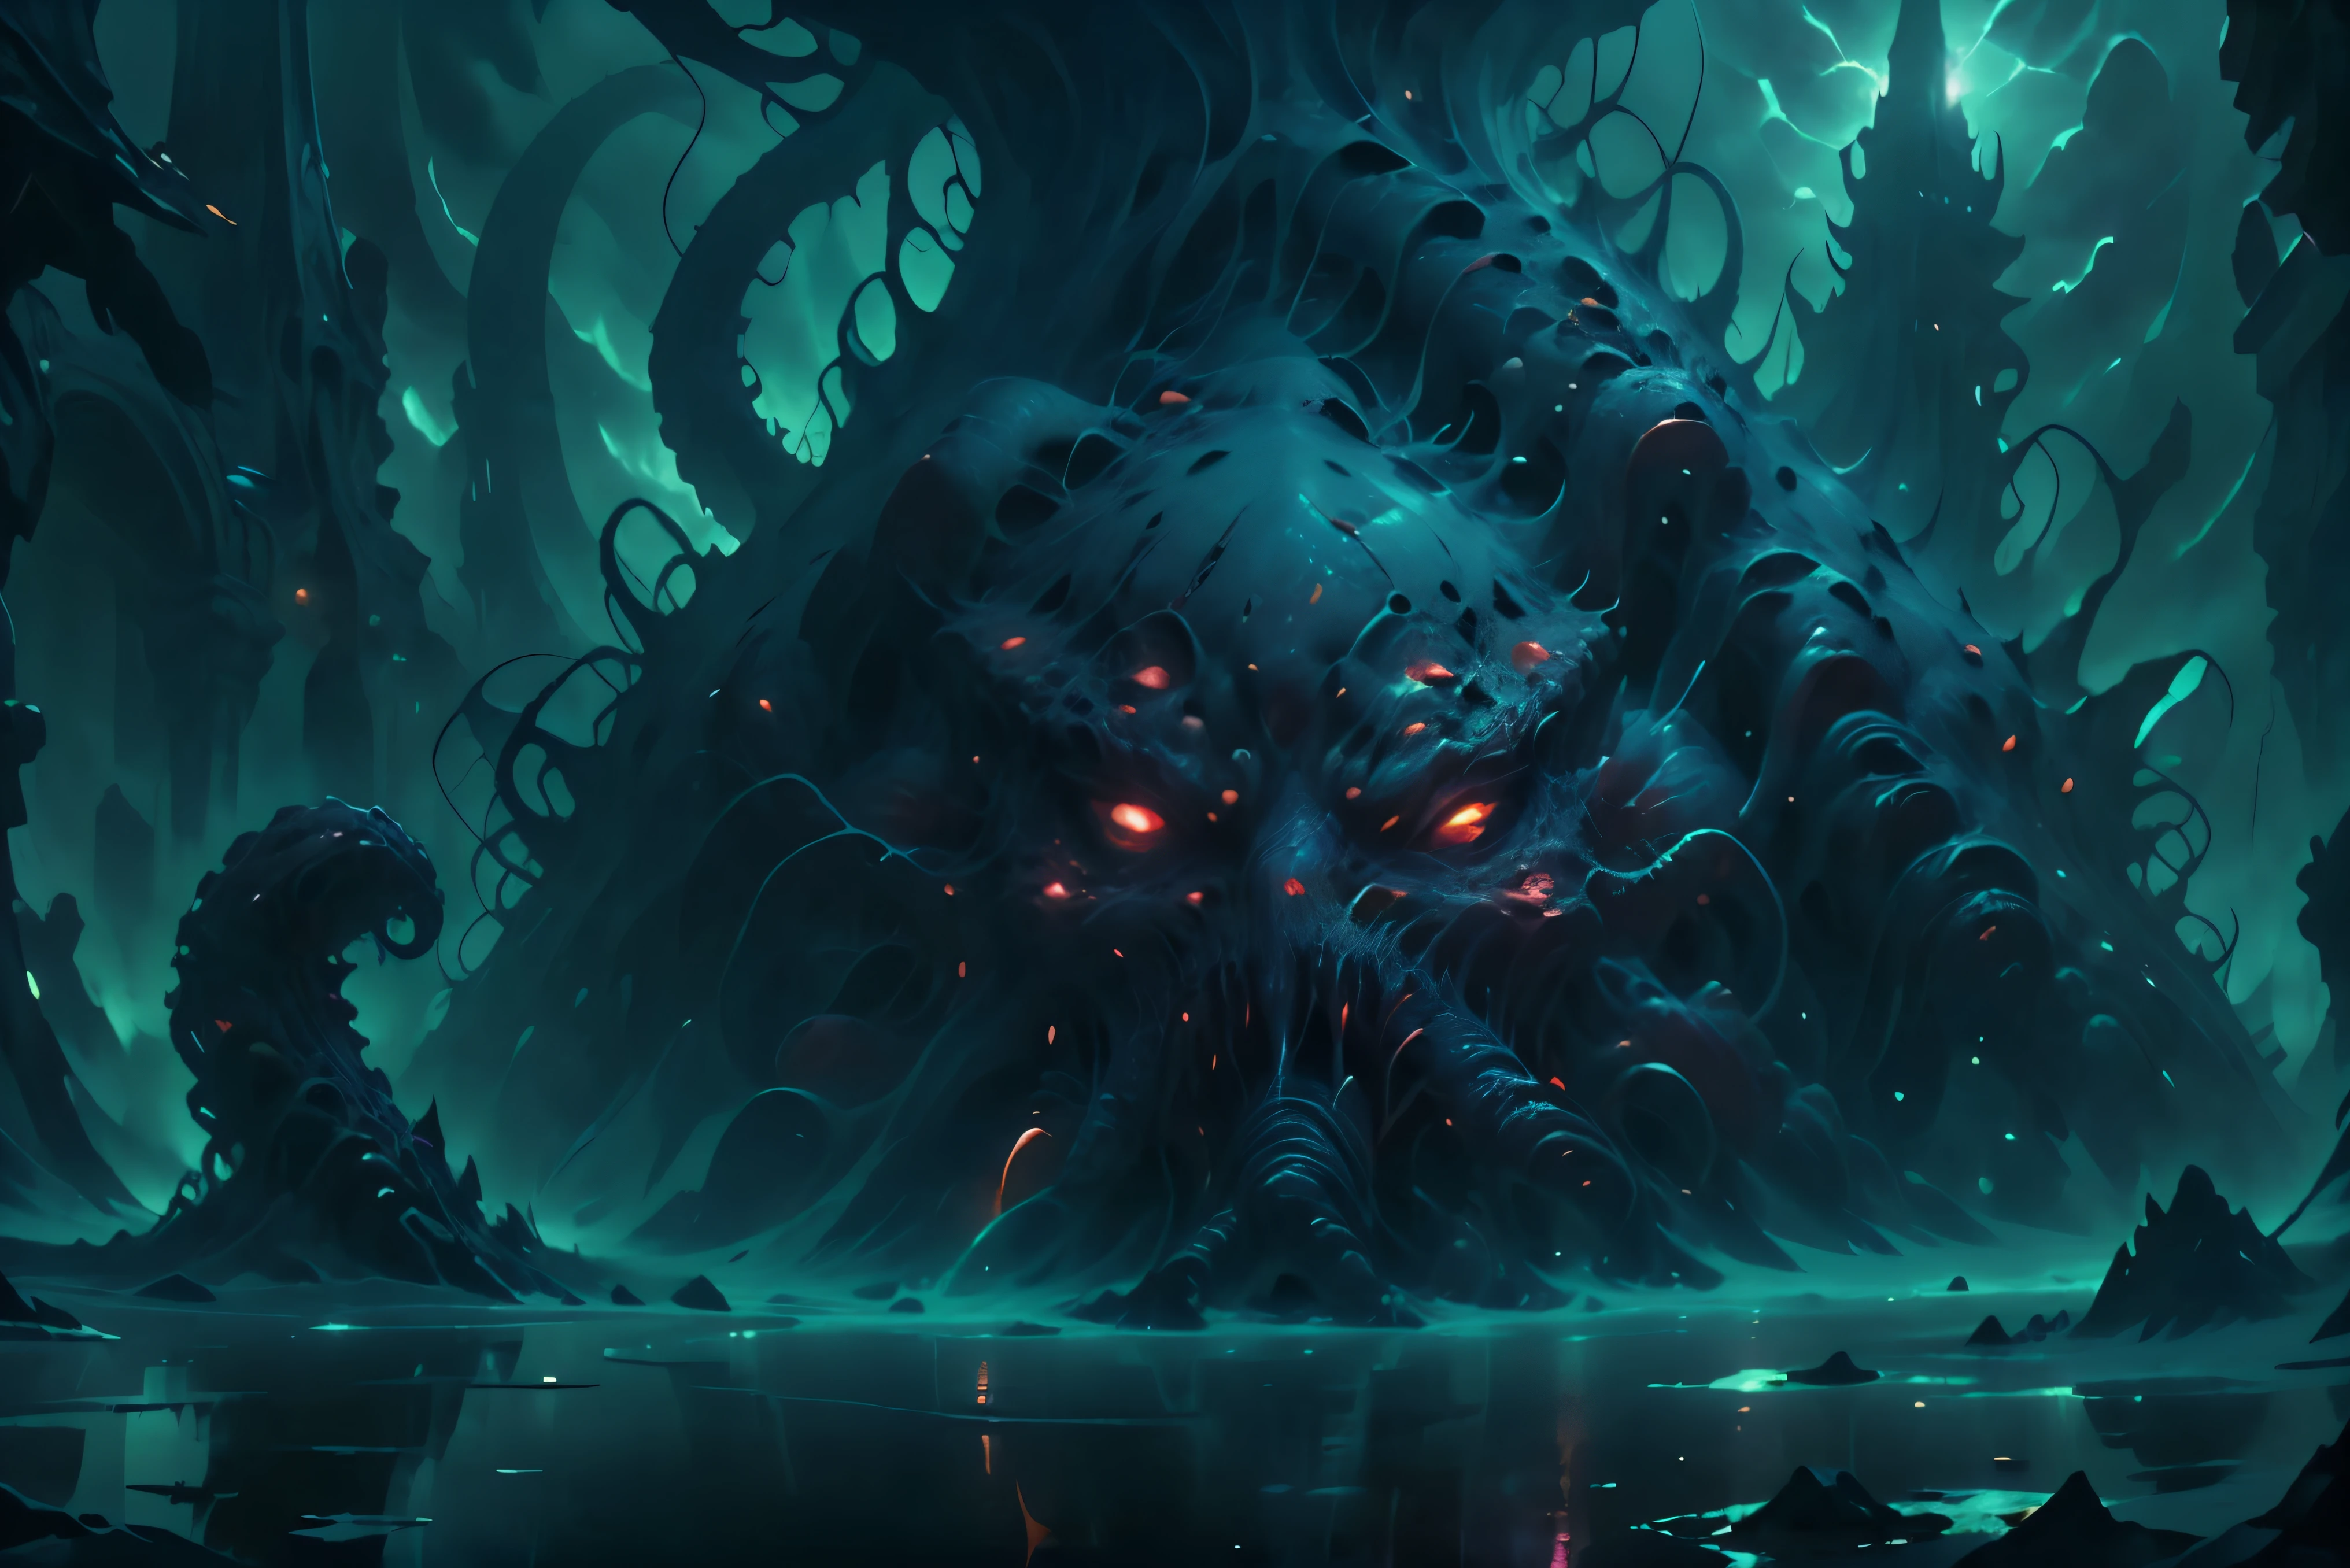 a monstrous tentacled entity,surreal dark fantasy,malevolent cosmic horror,tentacles,an elder god,abyssal depths,nightmarish,otherworldly,atmospheric,dramatic lighting,chiaroscuro,moody colors,deep blues and purples,glowing eyes,detailed textures,intricate patterns,organic forms,best quality,8k,high-resolution,photorealistic,masterpiece,digital painting,concept art